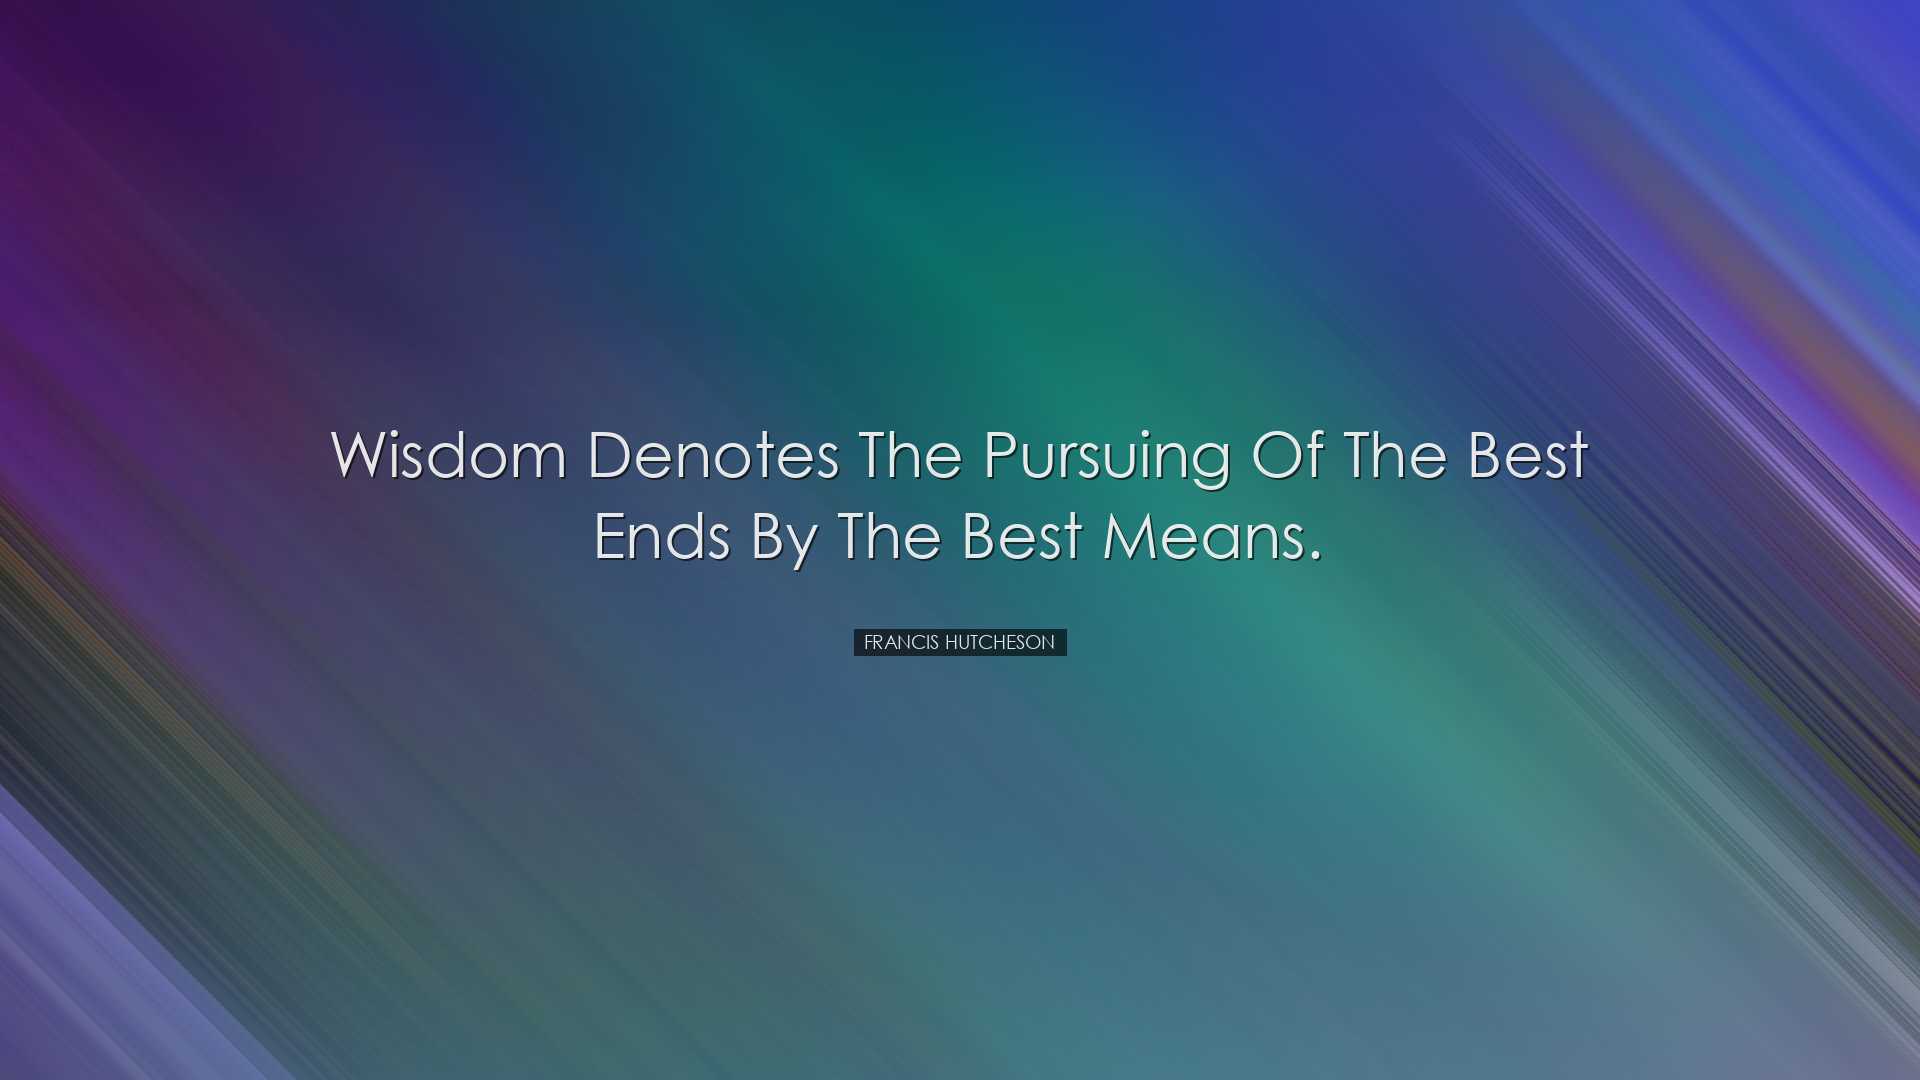 Wisdom denotes the pursuing of the best ends by the best means. -